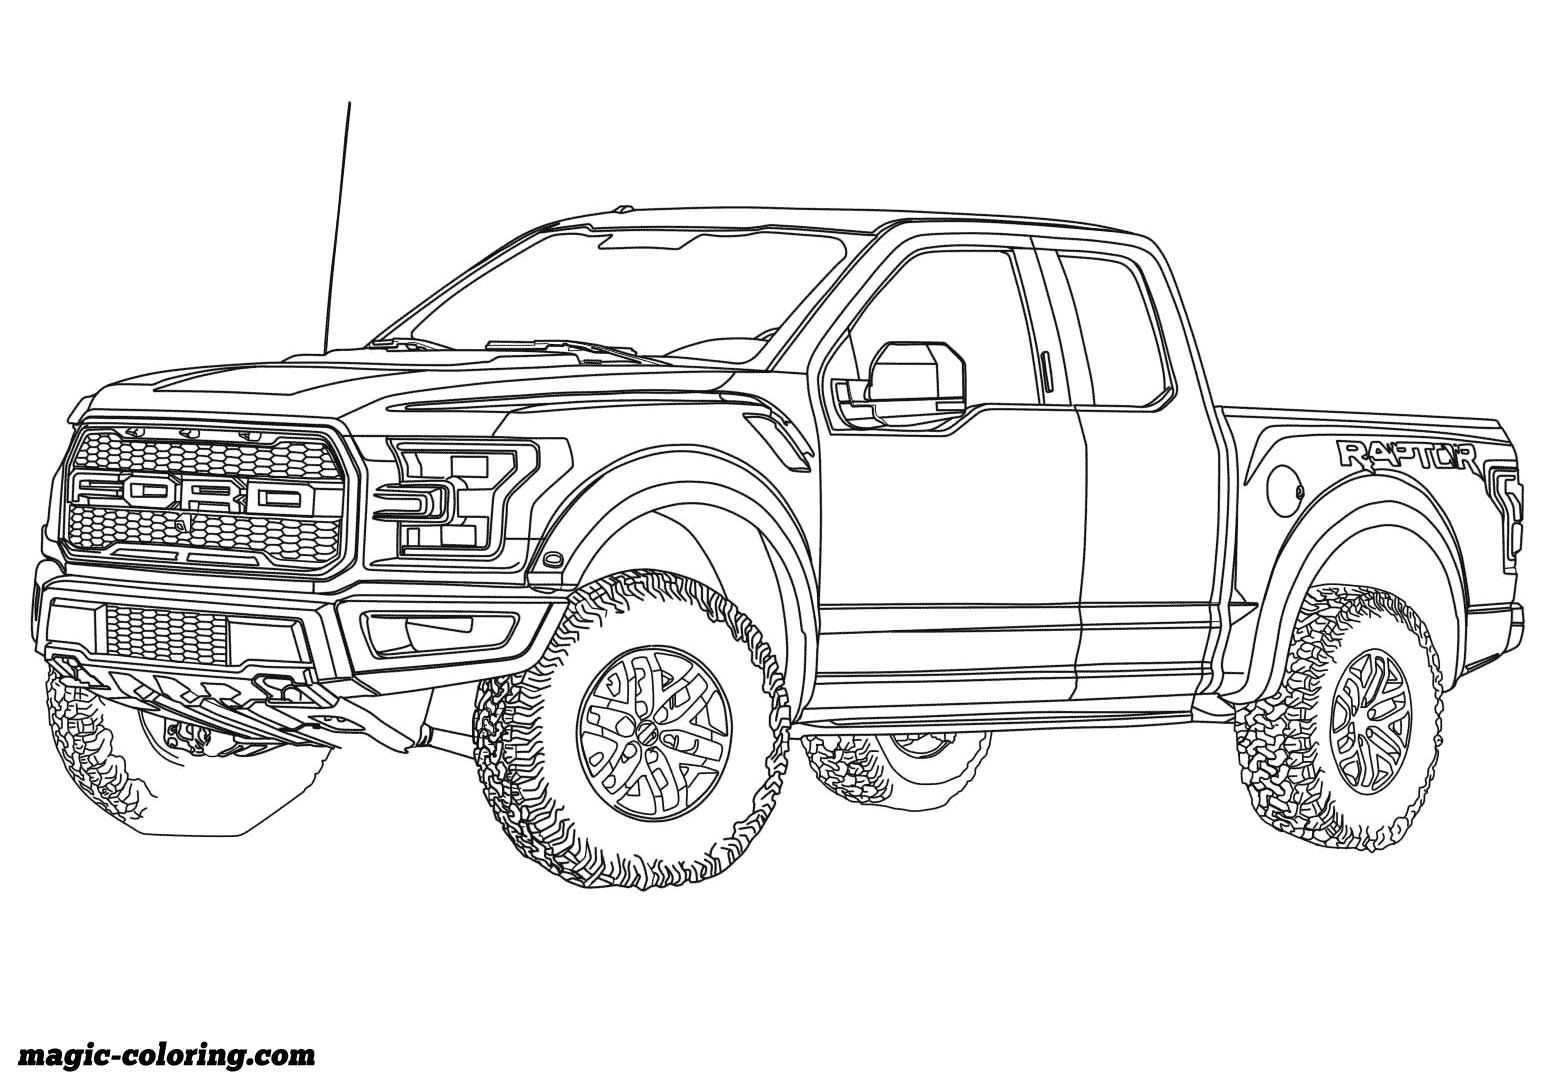 2017 Ford F 150 Raptor Coloring Page Truck Coloring Pages Ford Raptor Truck Cars Colo